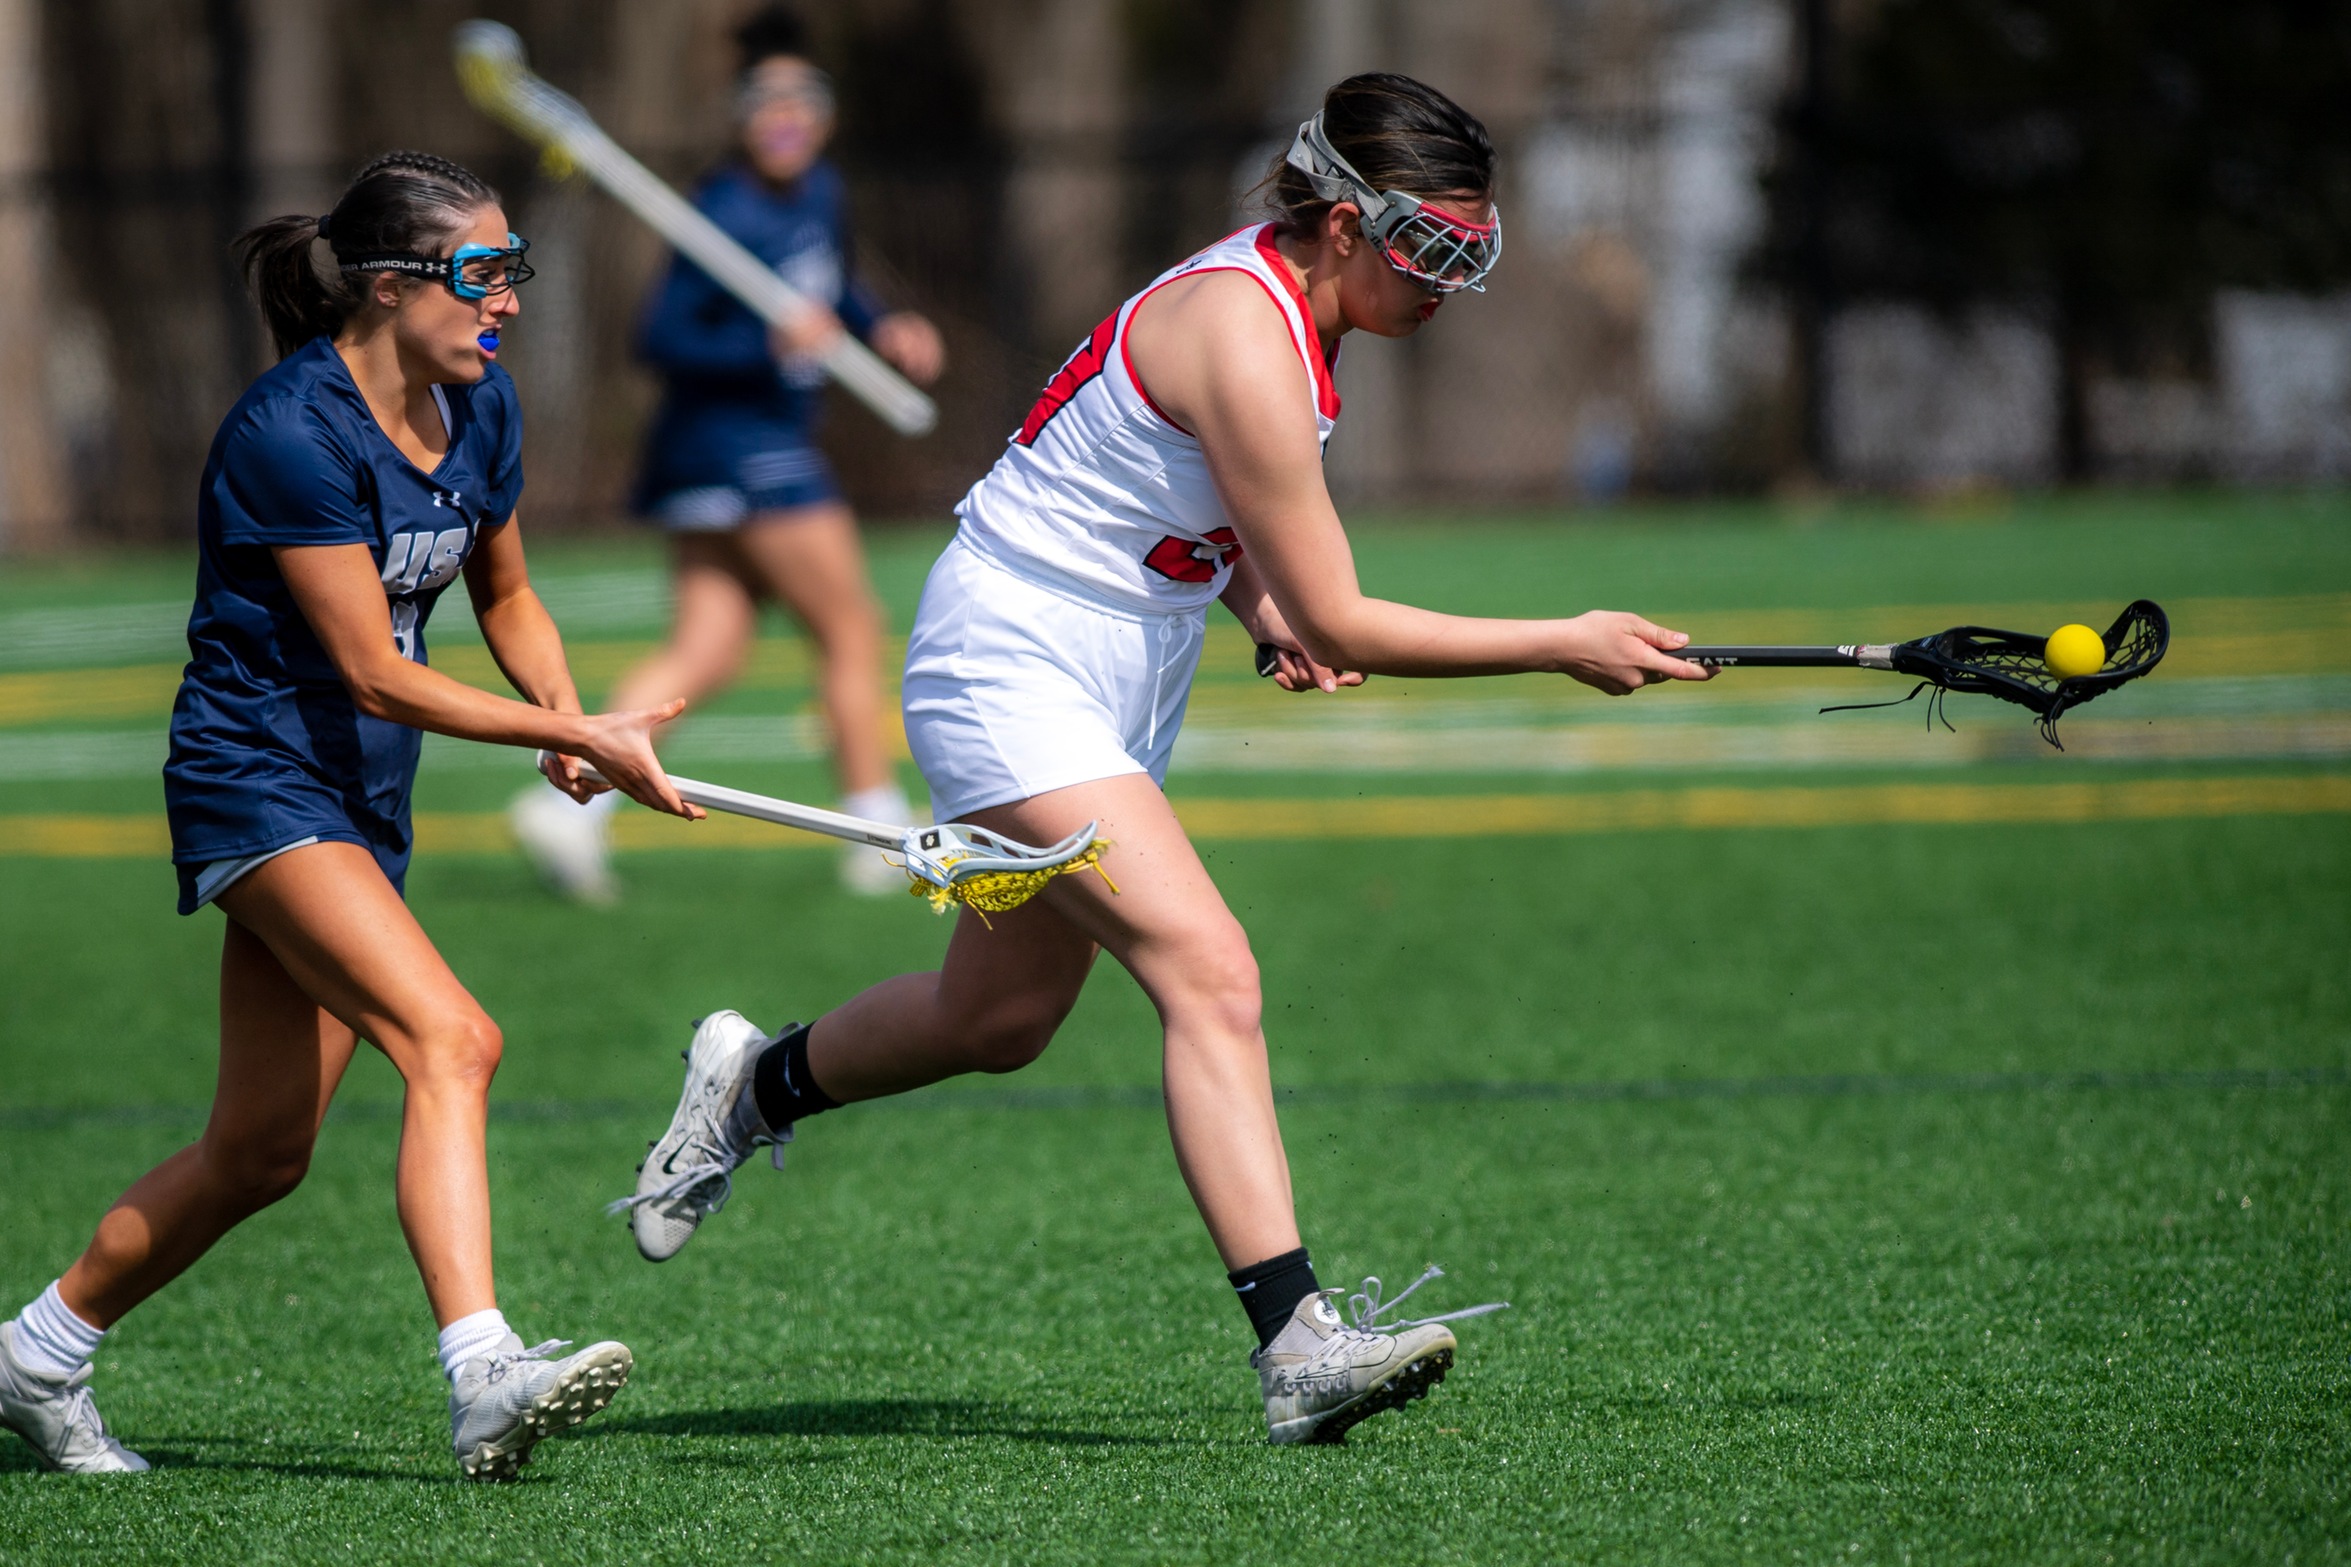 WLAX Falls in Conference Match Against NEC